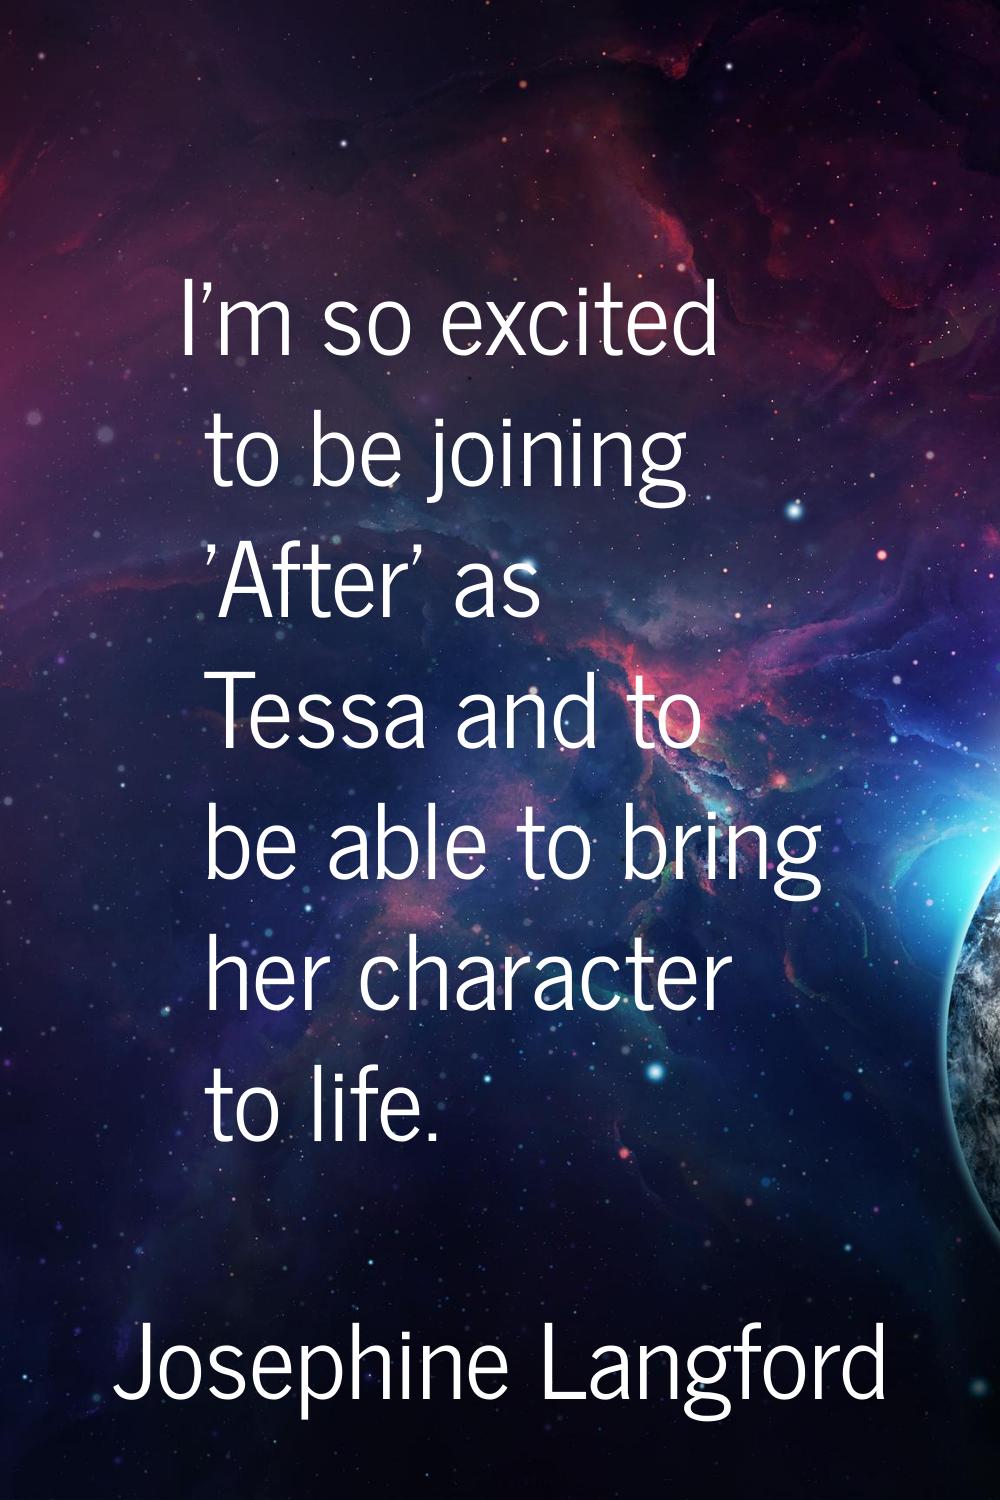 I'm so excited to be joining 'After' as Tessa and to be able to bring her character to life.